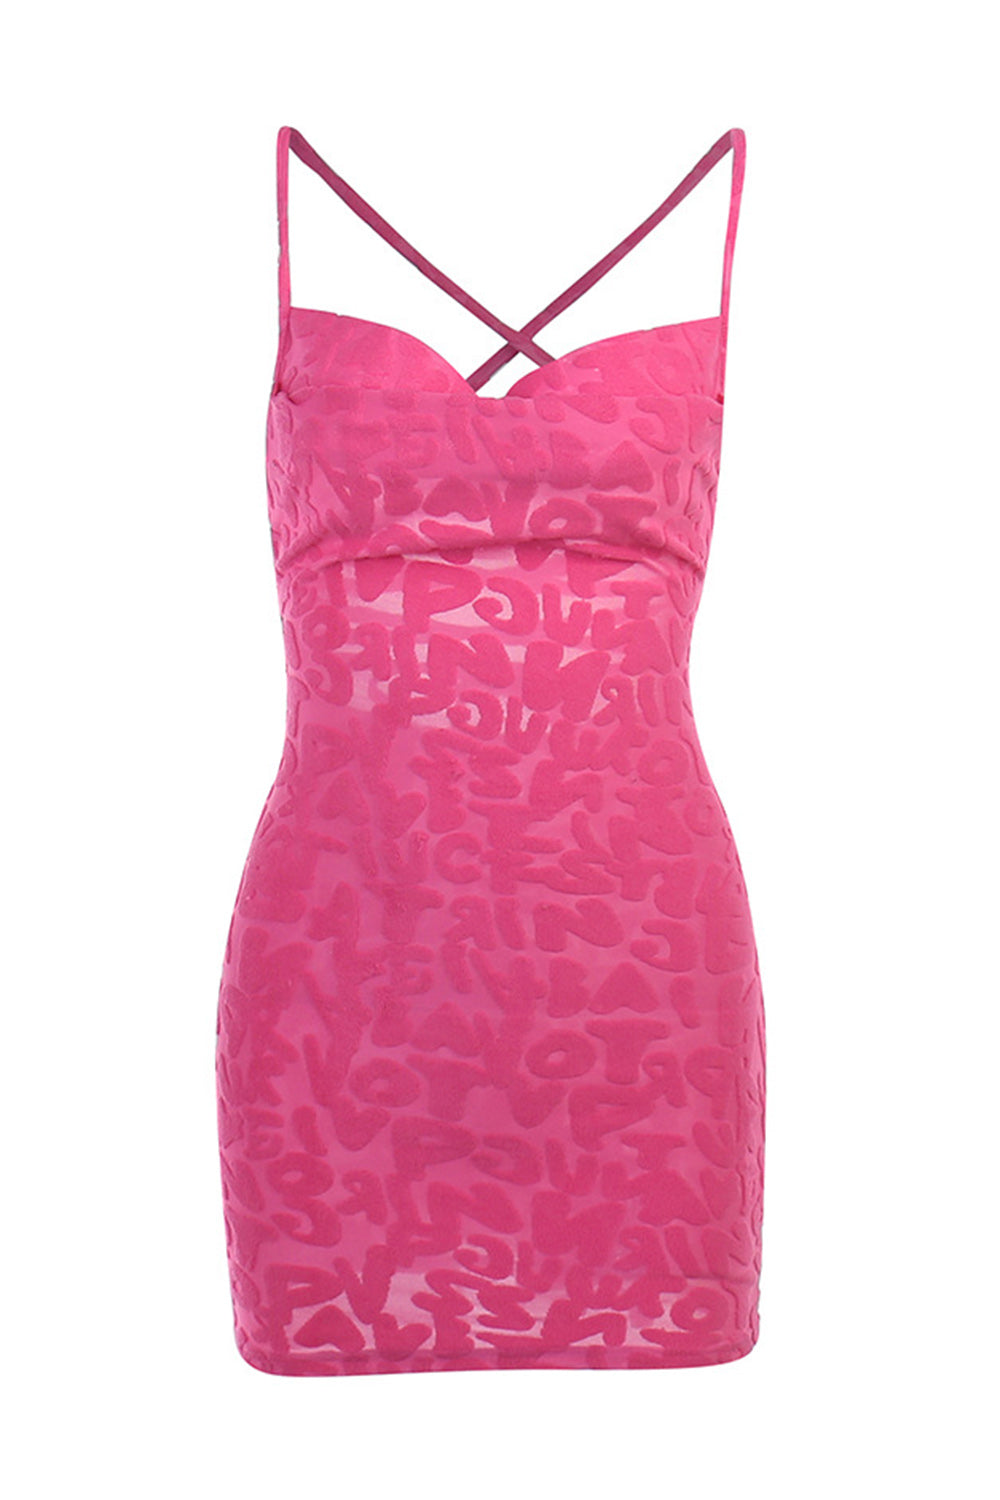 Lace-Up Back Fuchsia Bodycon Party Dress